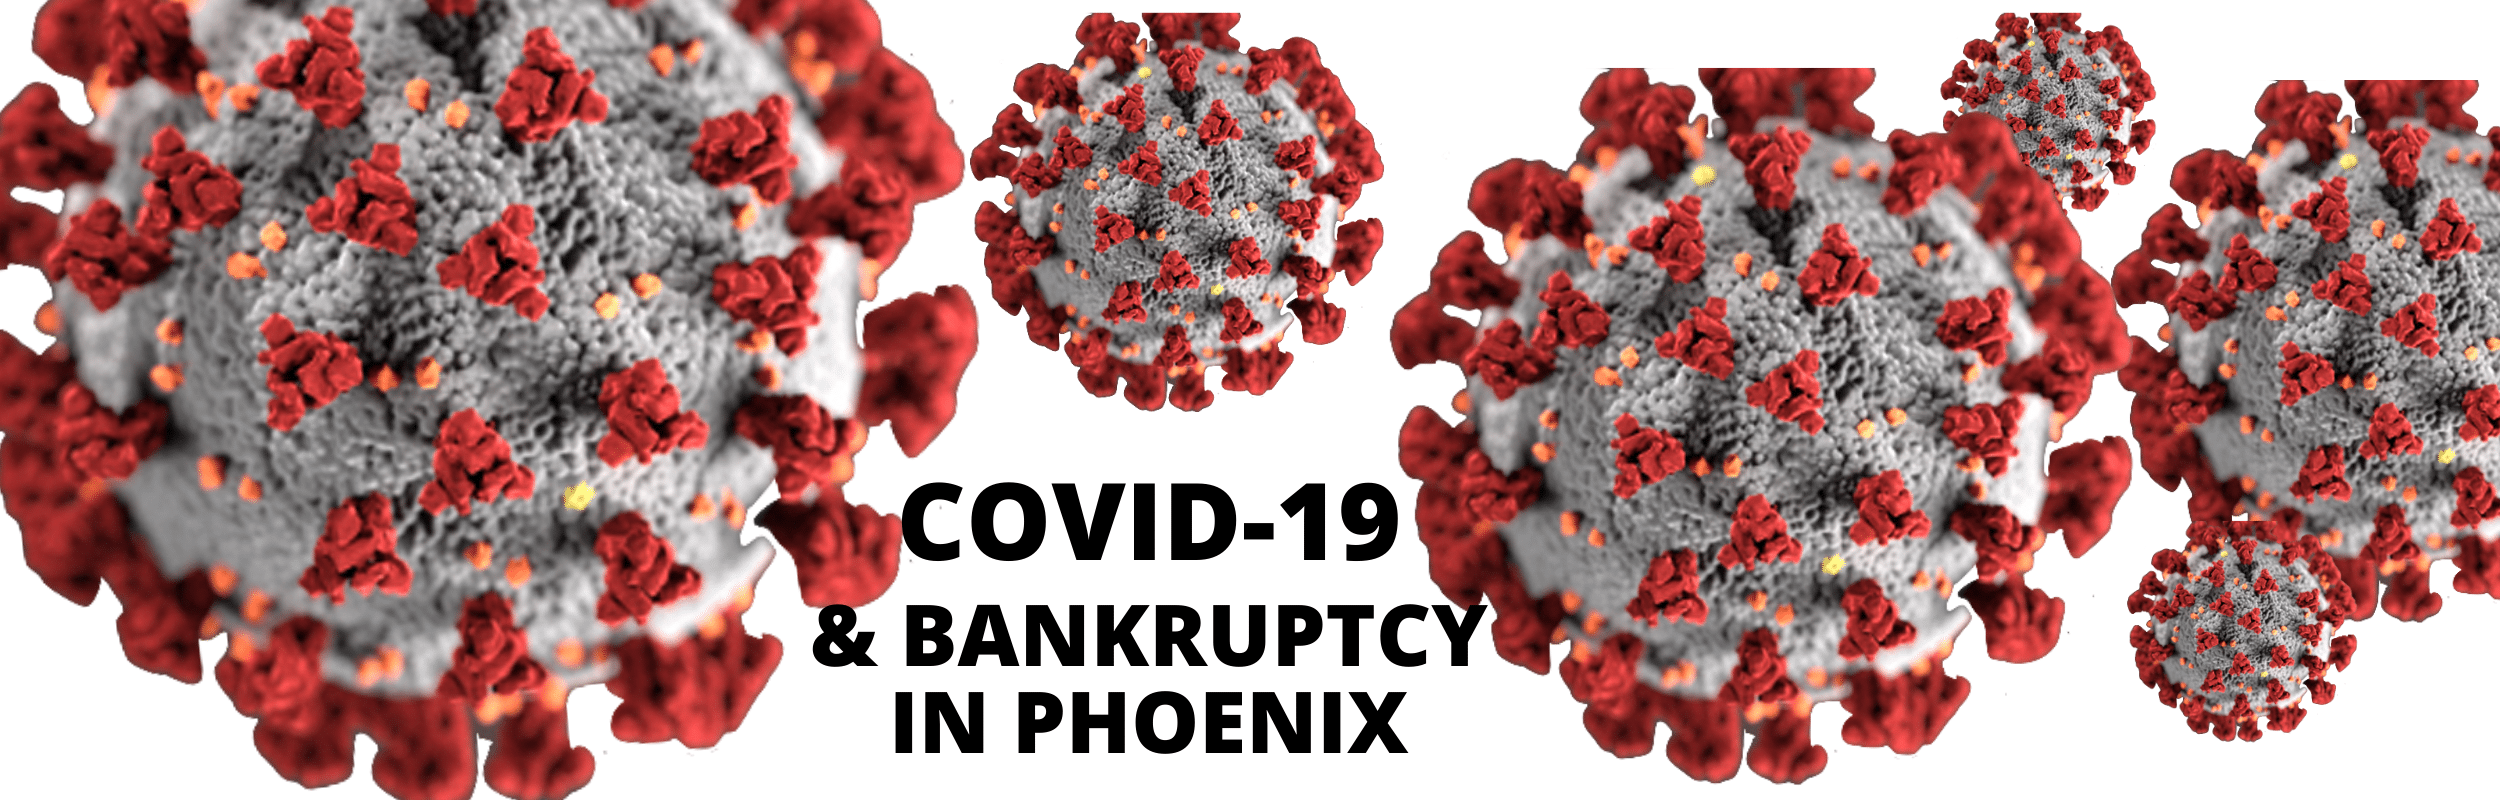 COVID-19 and bankruptcy in Phoenix